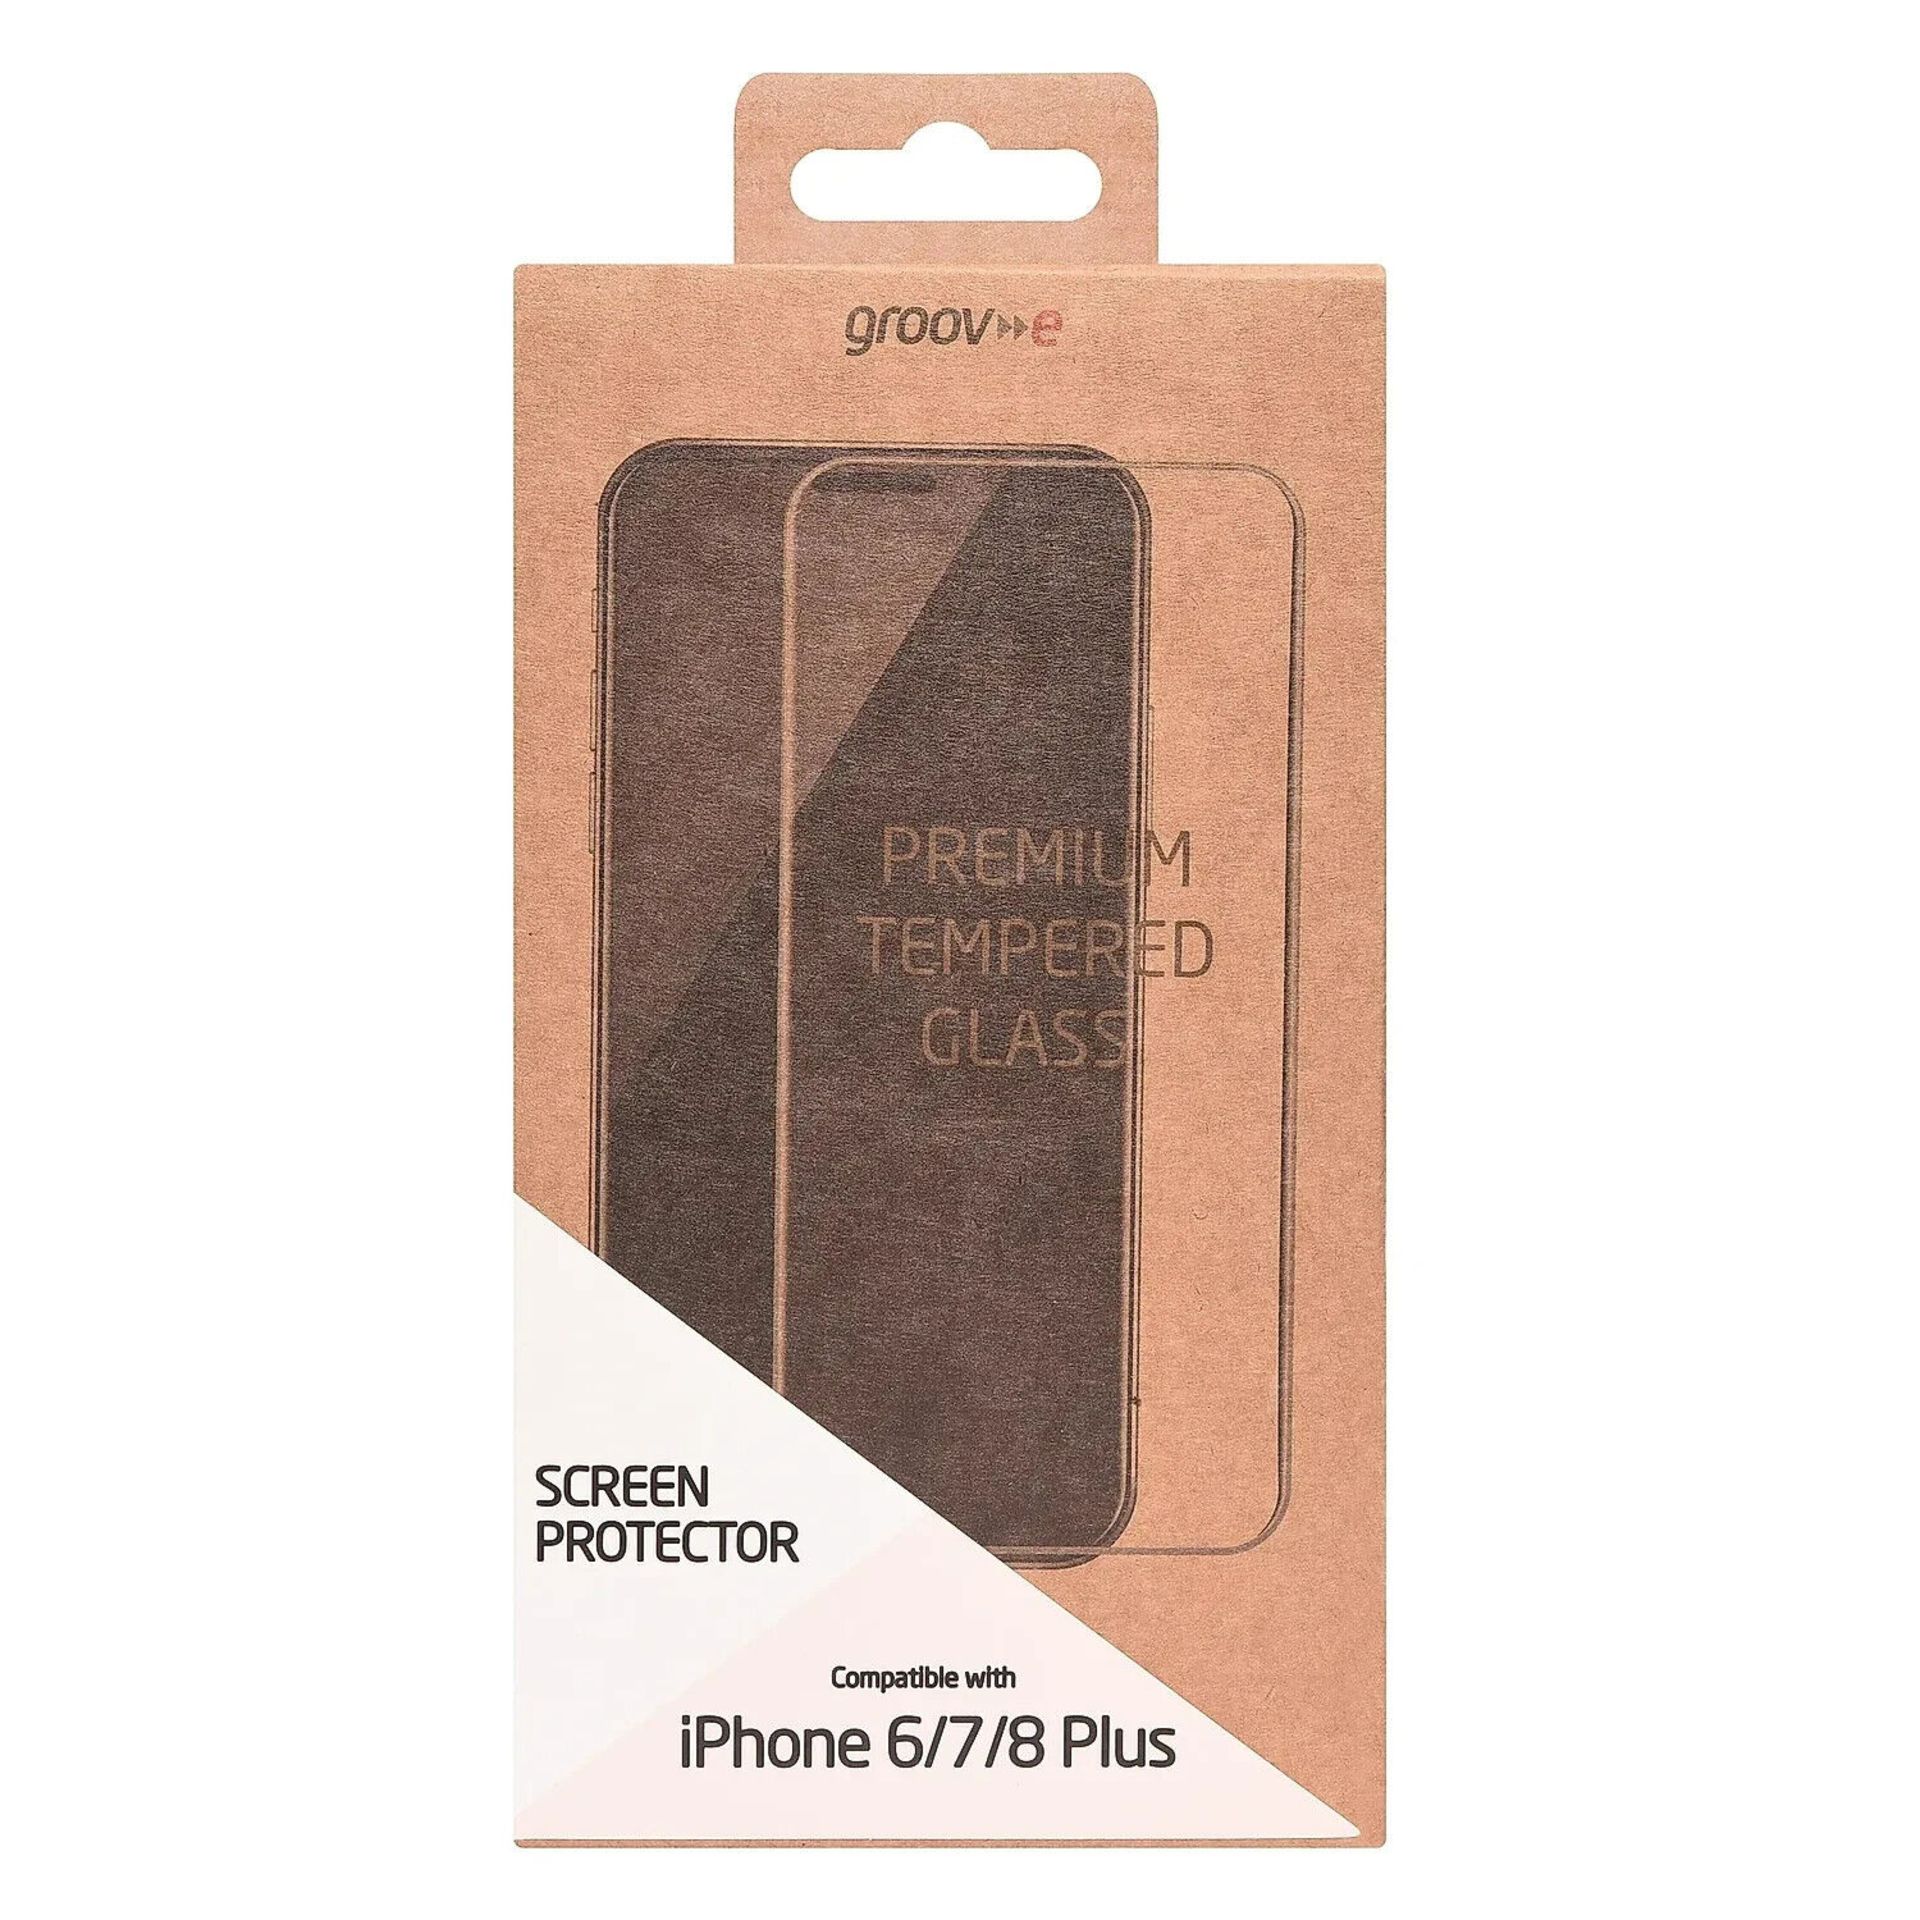 FULL PALLET OF GROOVE TEMPERED GLASS SCREEN PROTECTORS R16-9